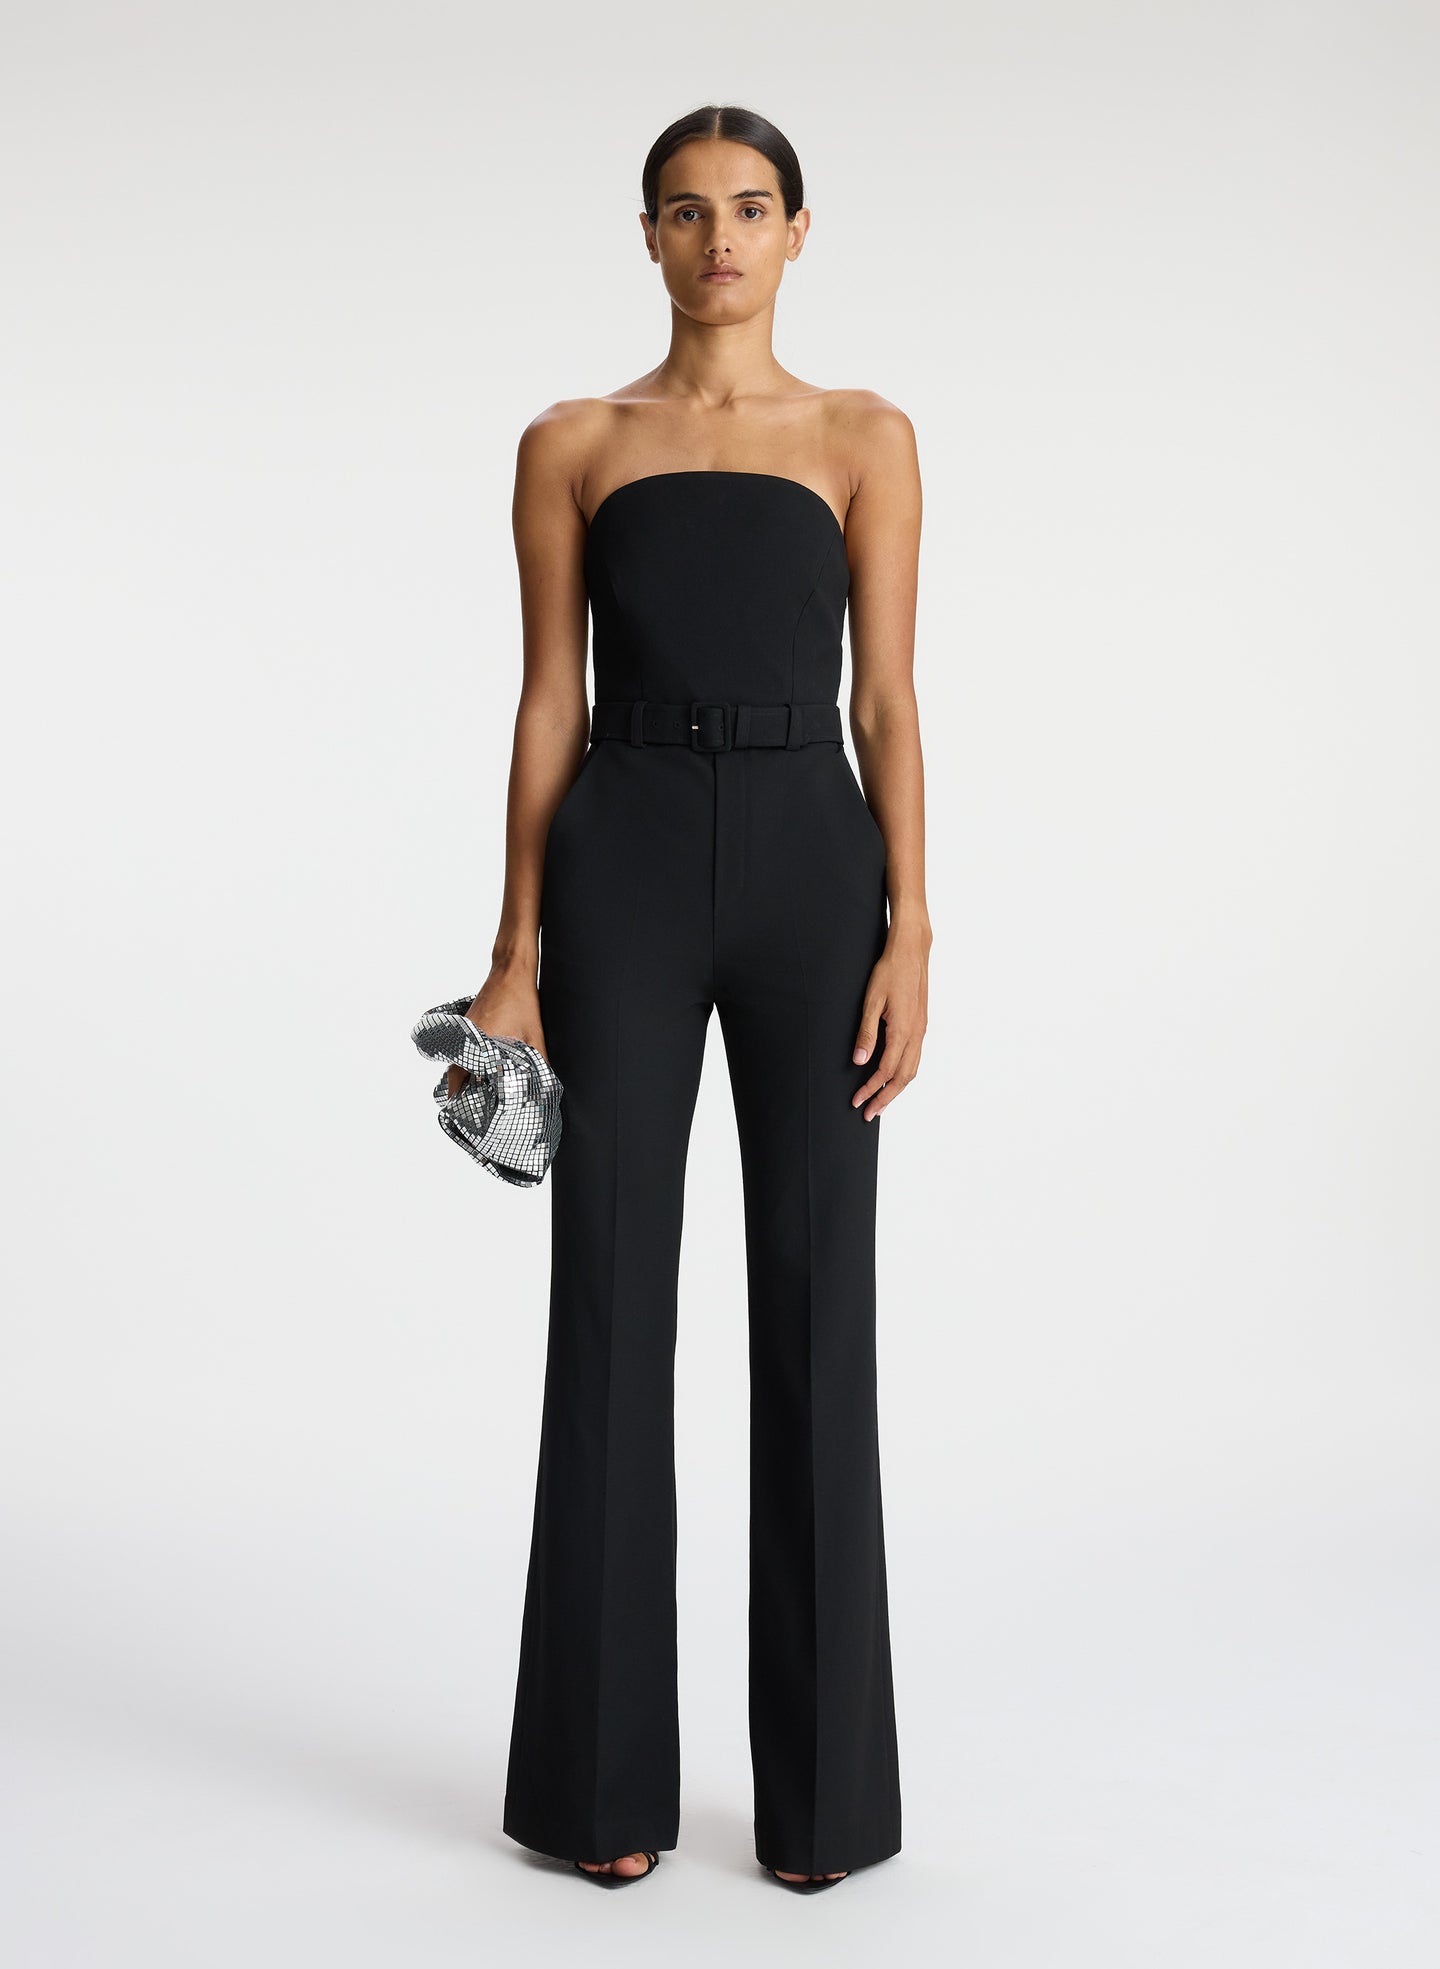 front view of woman wearing black strapless jumpsuit